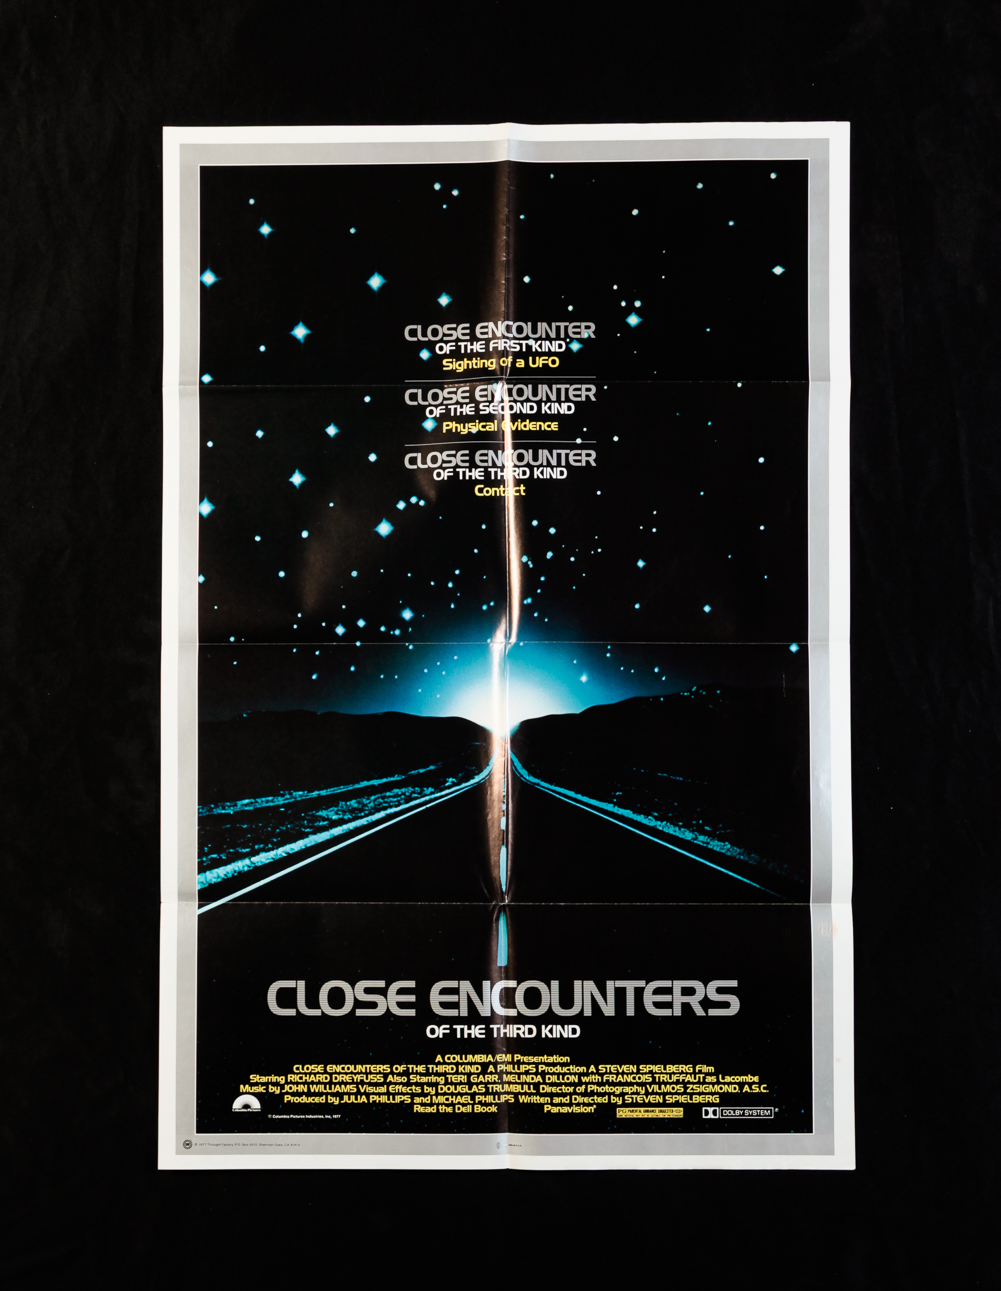 CLOSE ENCOUNTERS OF THE THIRD KIND (1977).